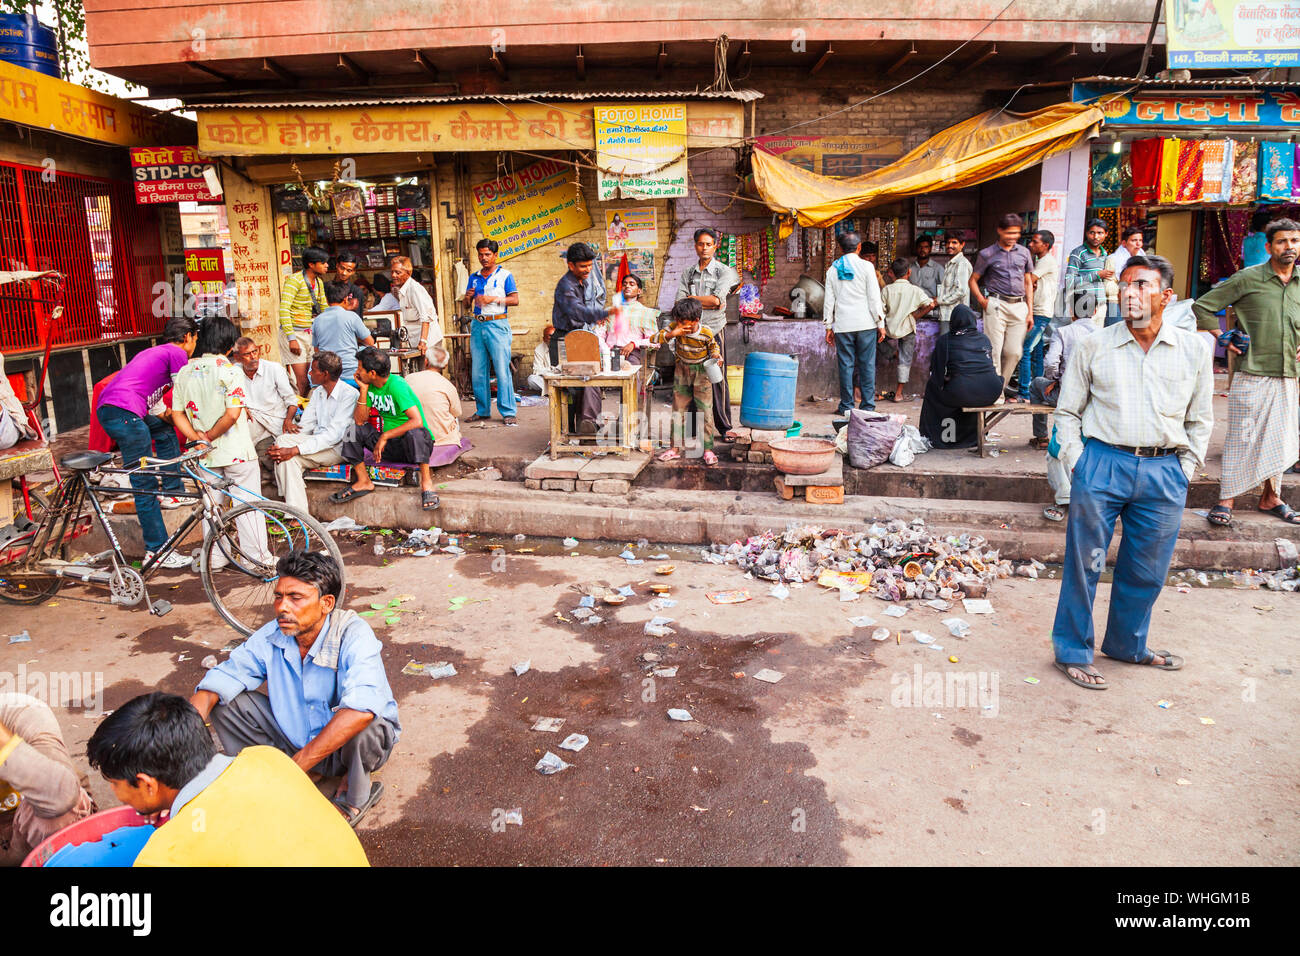 AGRA, INDIA - APRIL 10, 2012: A lot of garbage on the street in Agra city, Uttar Pradesh state of India Stock Photo